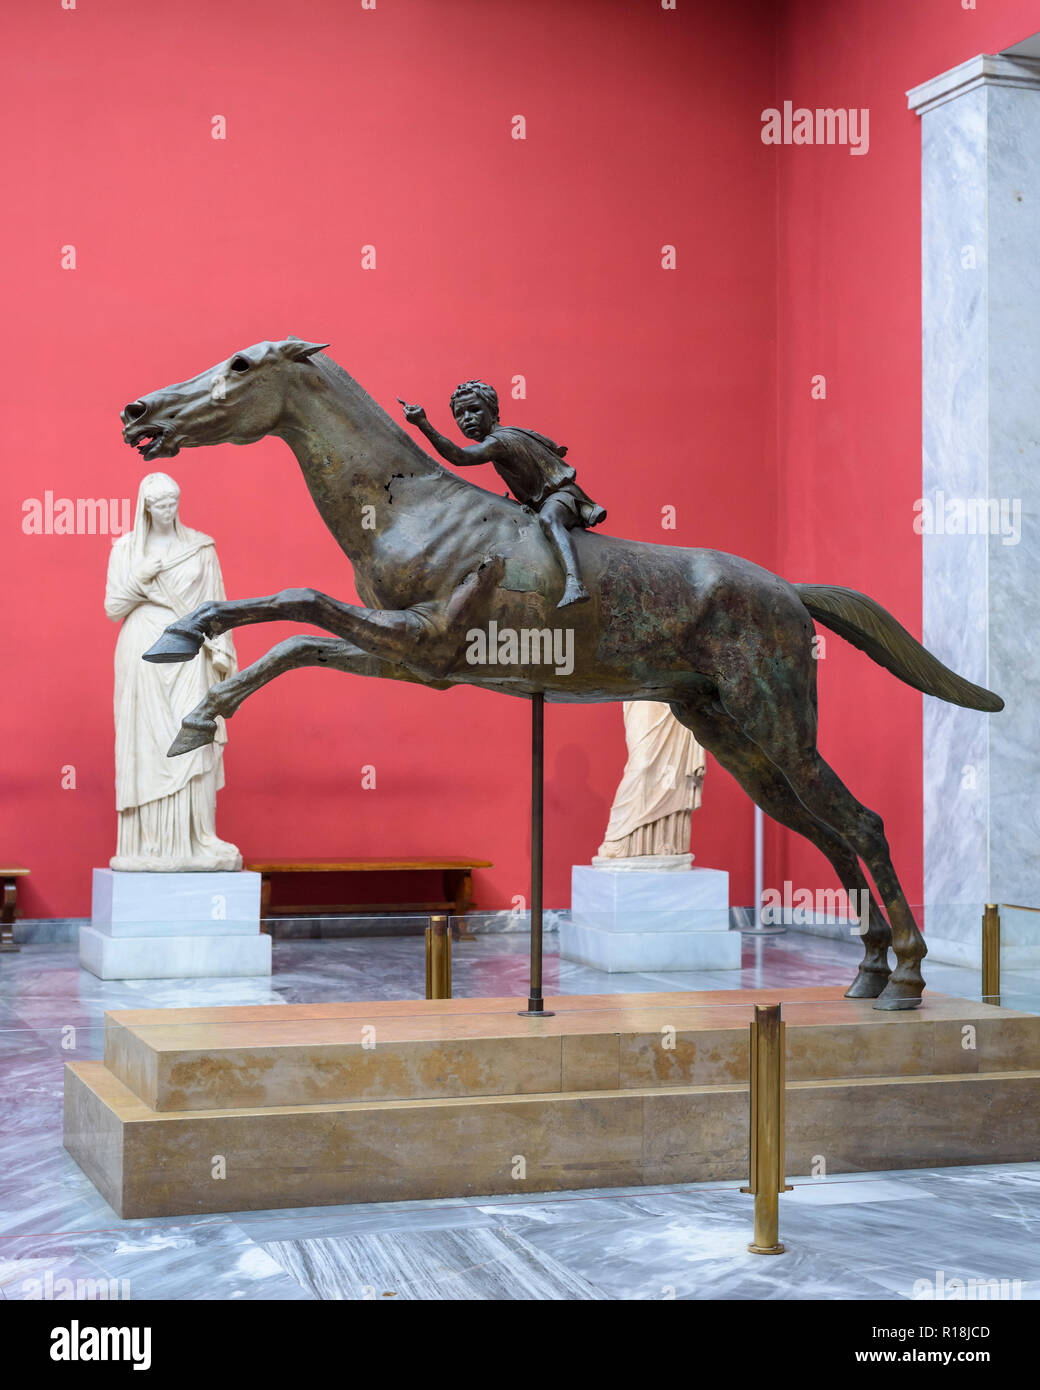 Athens. Greece. The Artemision Jockey, bronze statue of a horse and young jockey, dated ca. 140 B.C. National Archaeological Museum of Athens.  The st Stock Photo